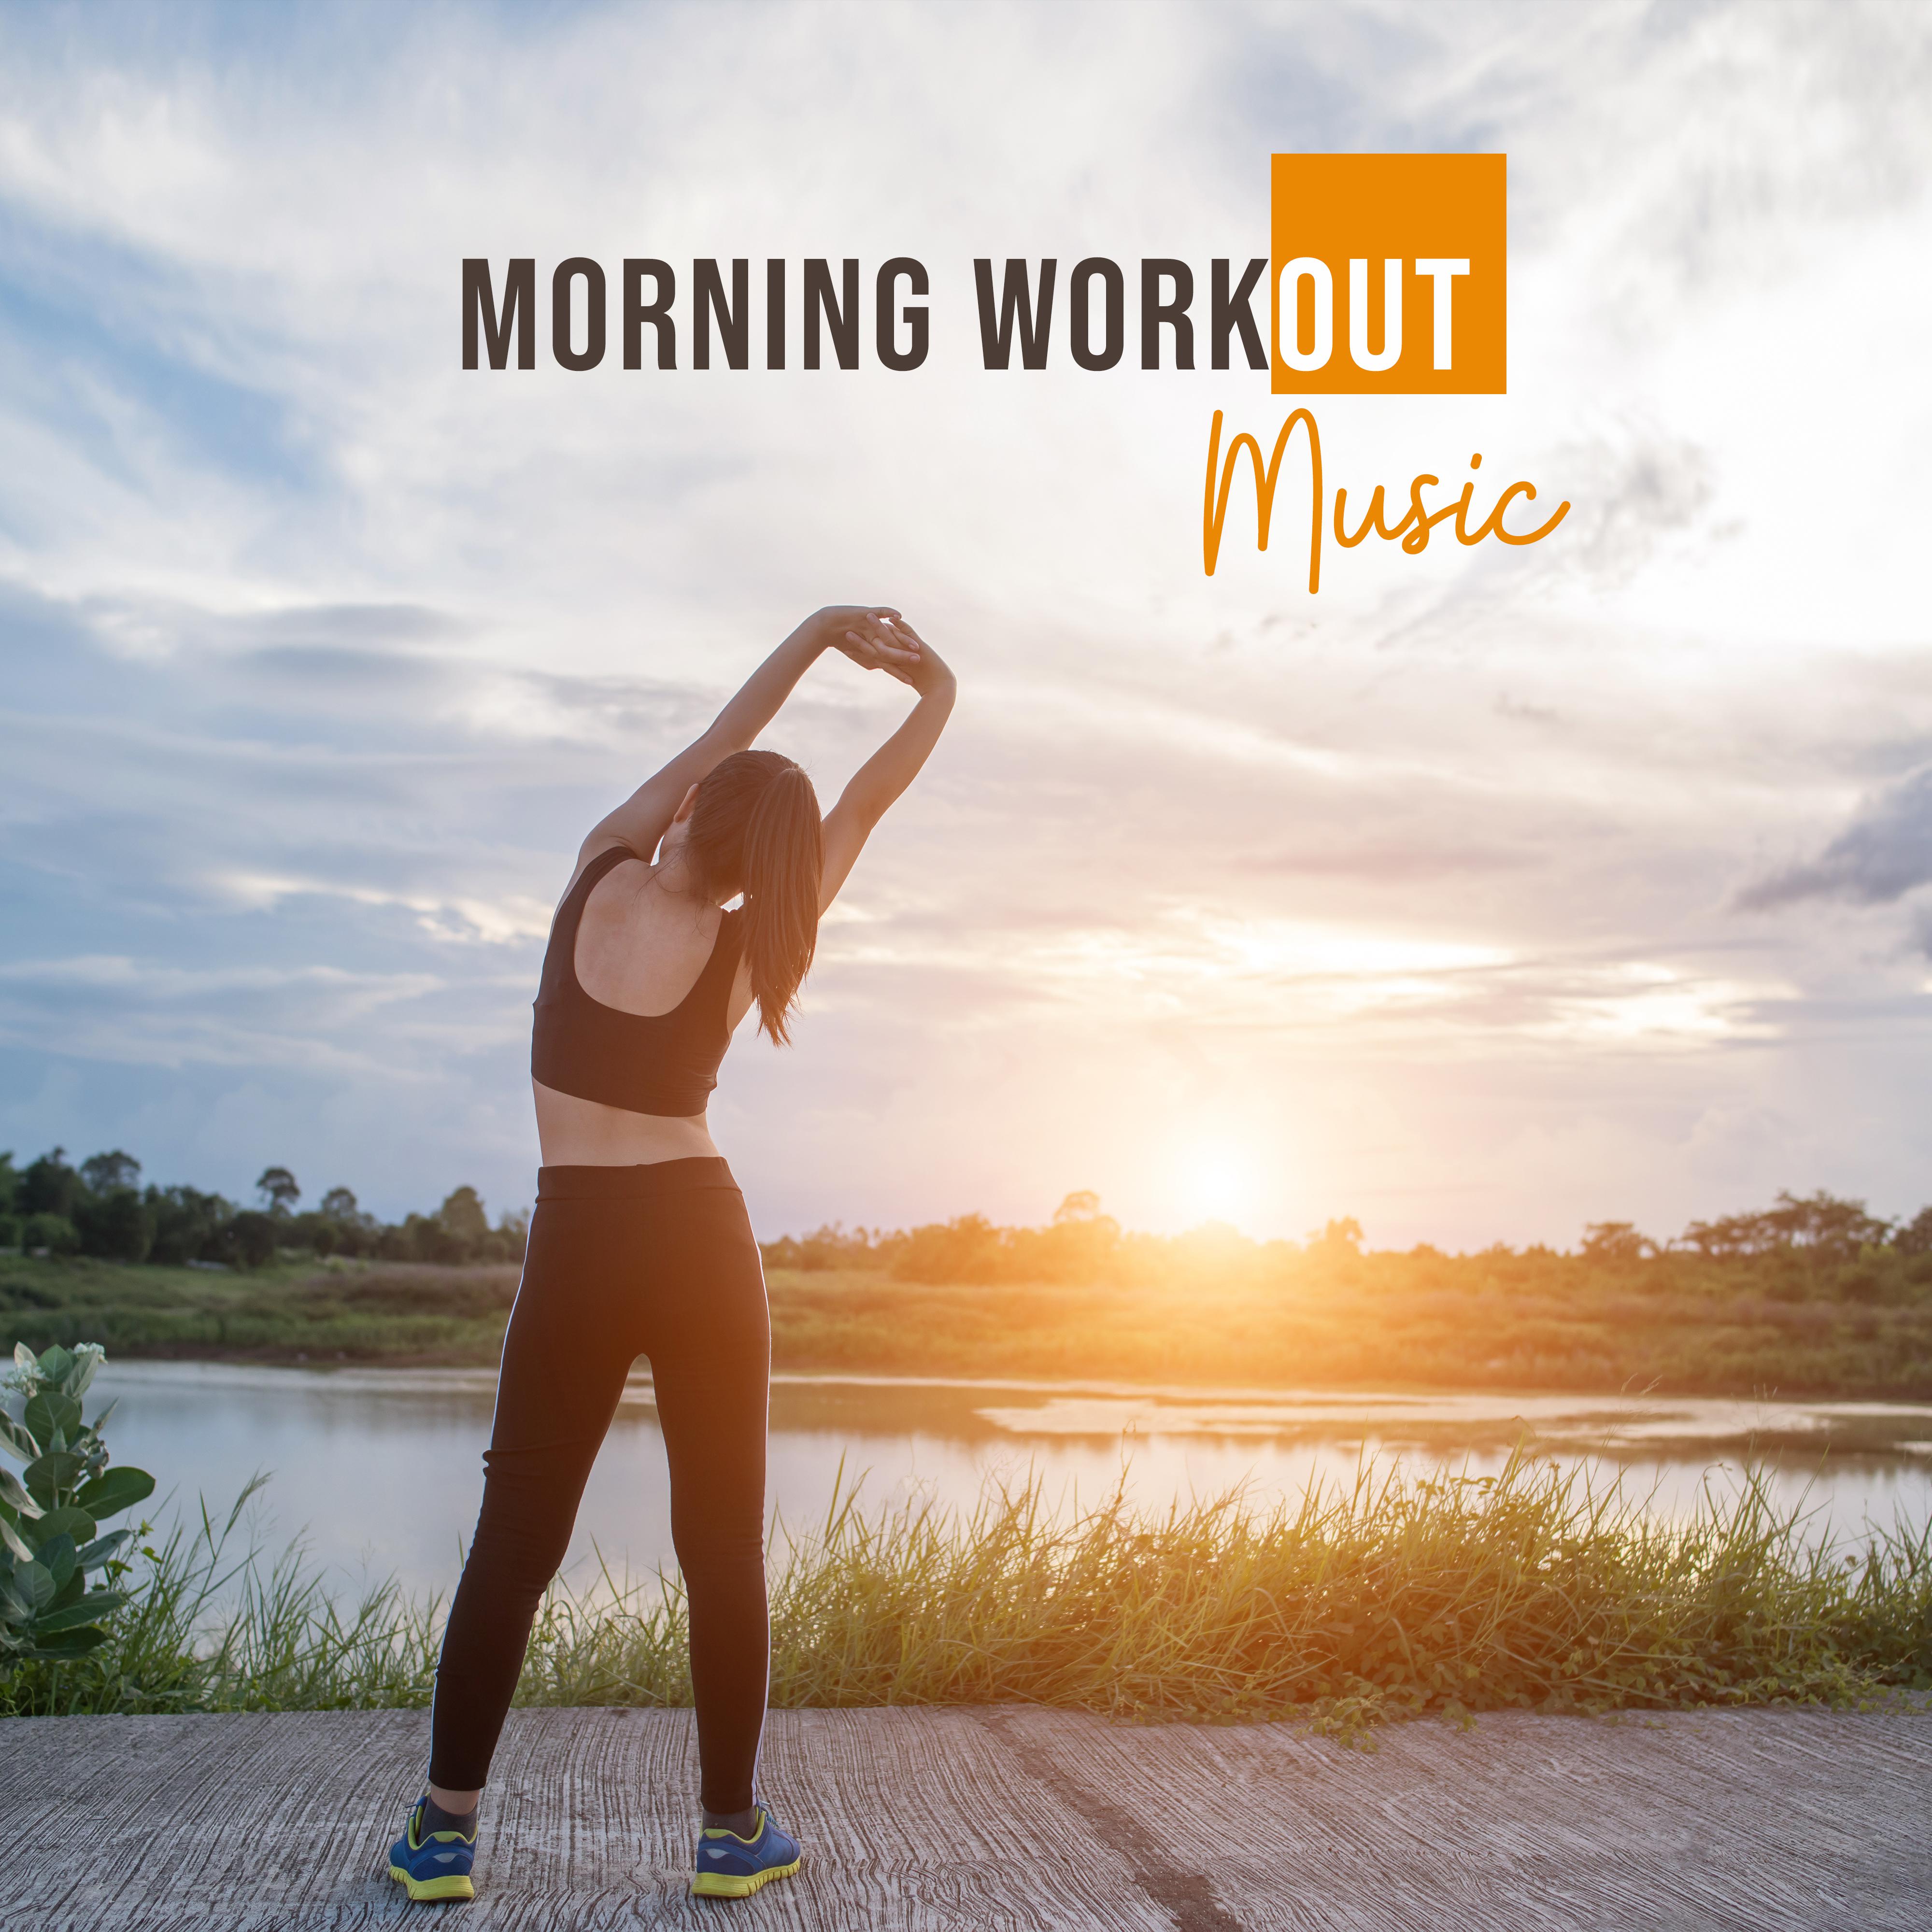 Morning Workout Music: Chillout 2019 Music Selection for Running, Jogging, Training on the Gym, Workout, Fitness, Motivation Best Beats